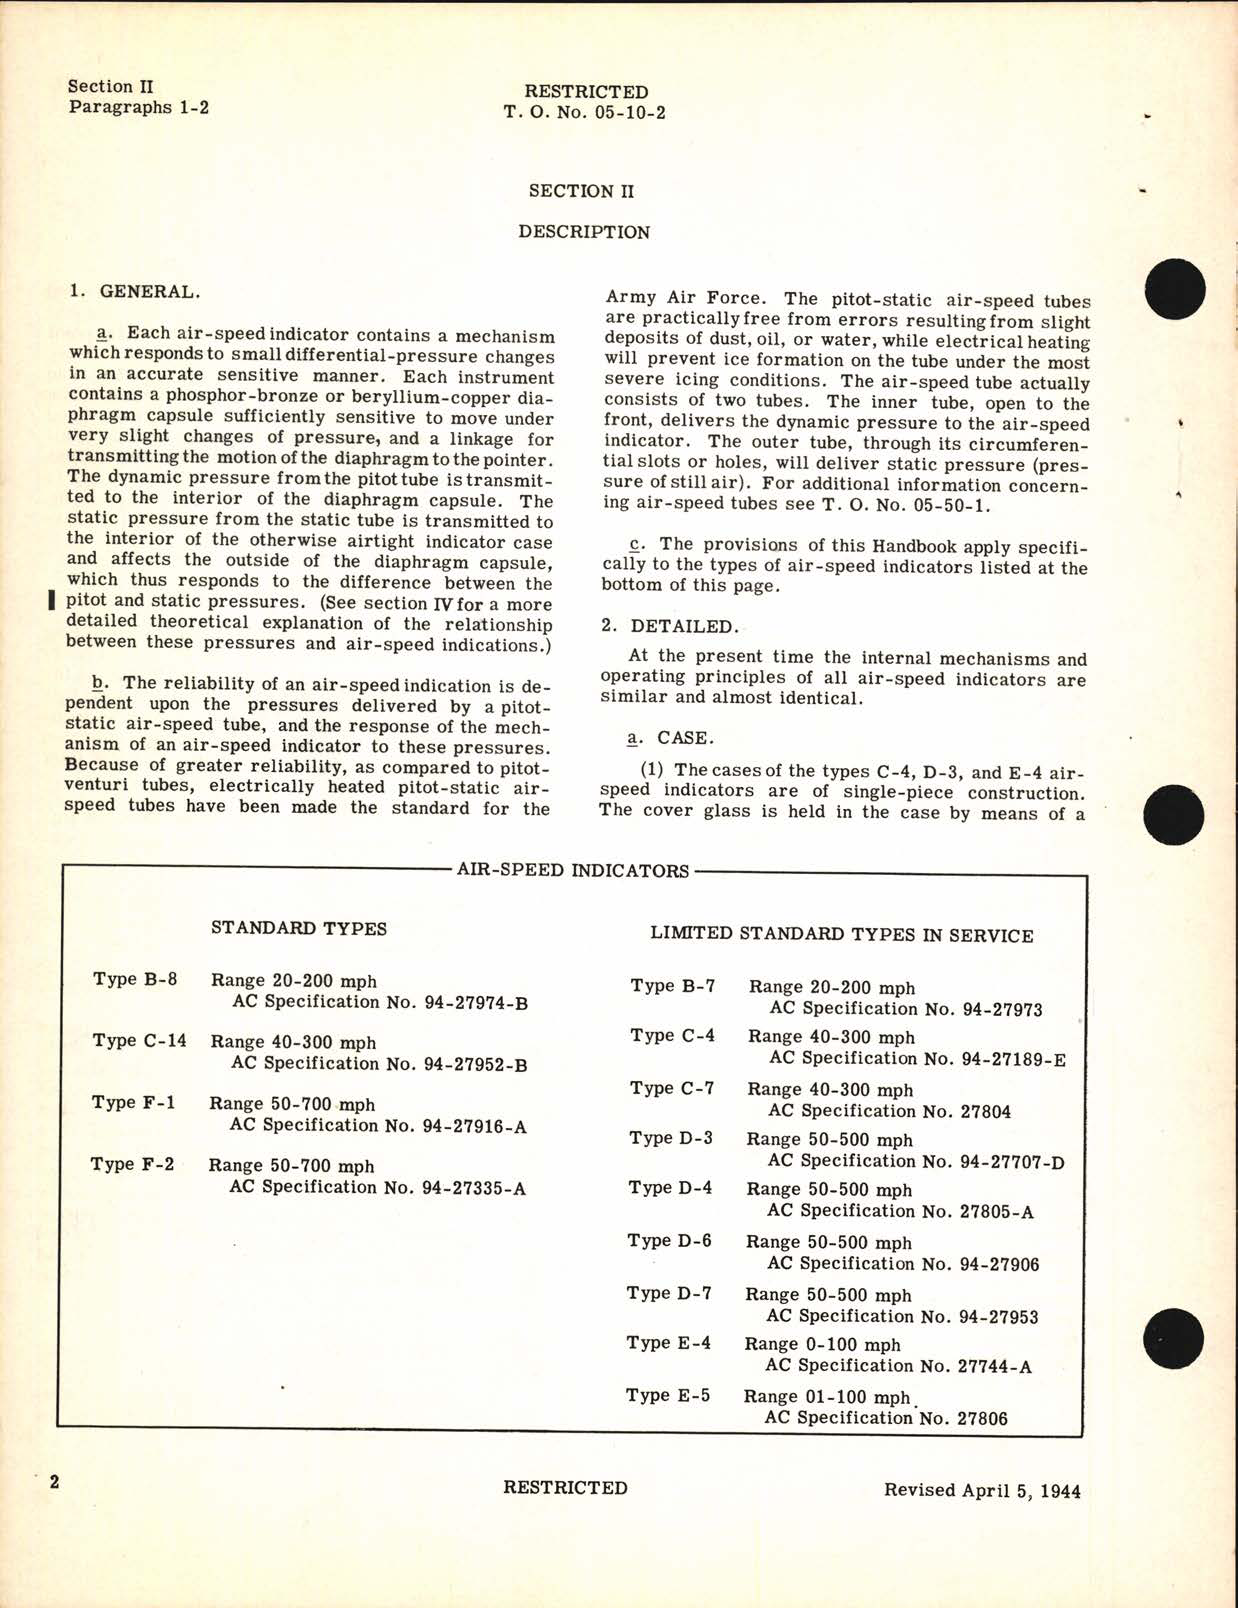 Sample page 6 from AirCorps Library document: Handbook of Instructions for Air-Speed Indicators